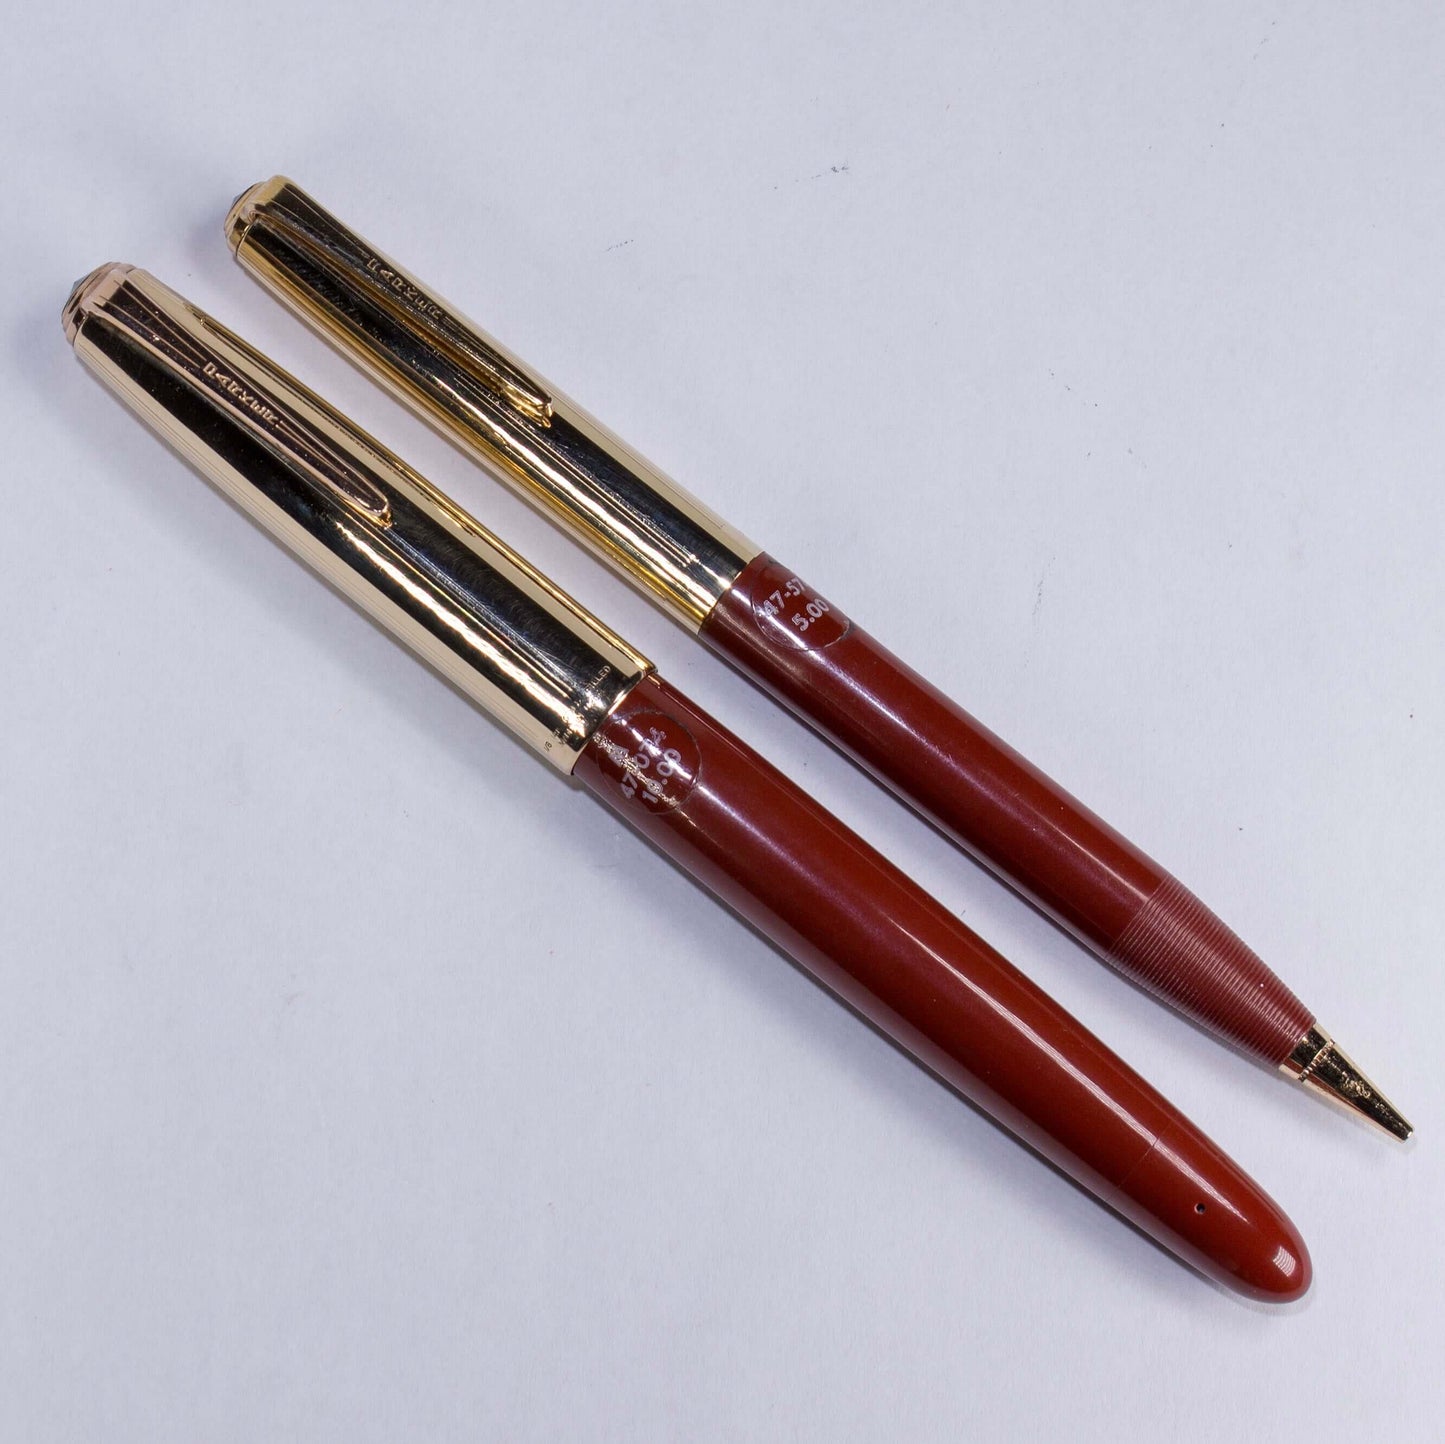 Parker VS Fountain Pen/Pencil Set, Rust, Button Filler, 14K Gold Filled Caps, StickeredName/Type: Restored Vintage Parker VS Fountain Pen/Pencil Set Manufacture Year: 1947 Length: 5 1/2 Filling System: Button Filler, restored with new sac. Color/Pattern: